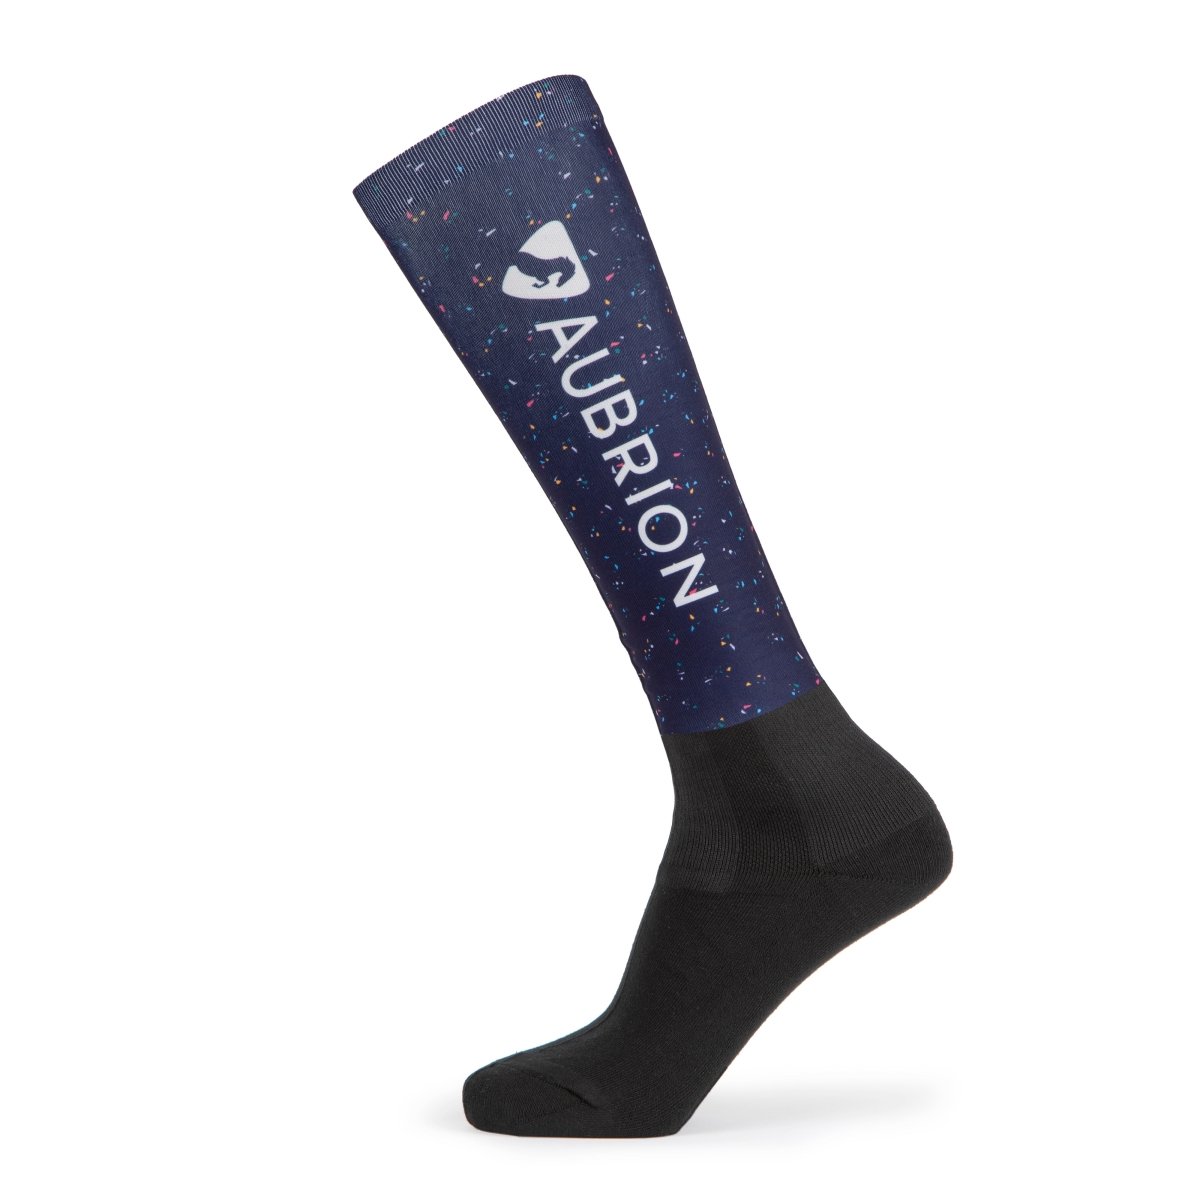 Aubrion Hyde Park Cross Country Socks - Navy Ditsy -